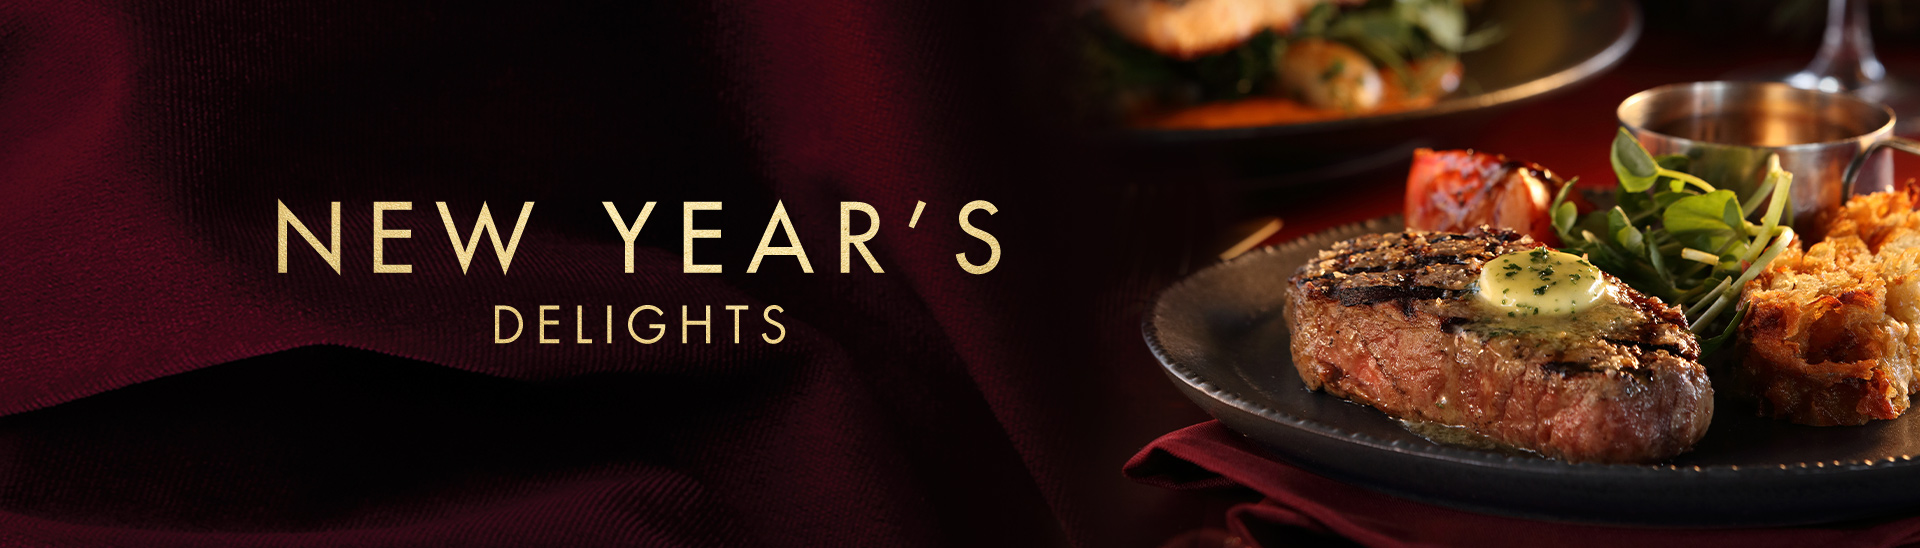 New Year’s Eve 2019 at Miller & Carter Wollaton